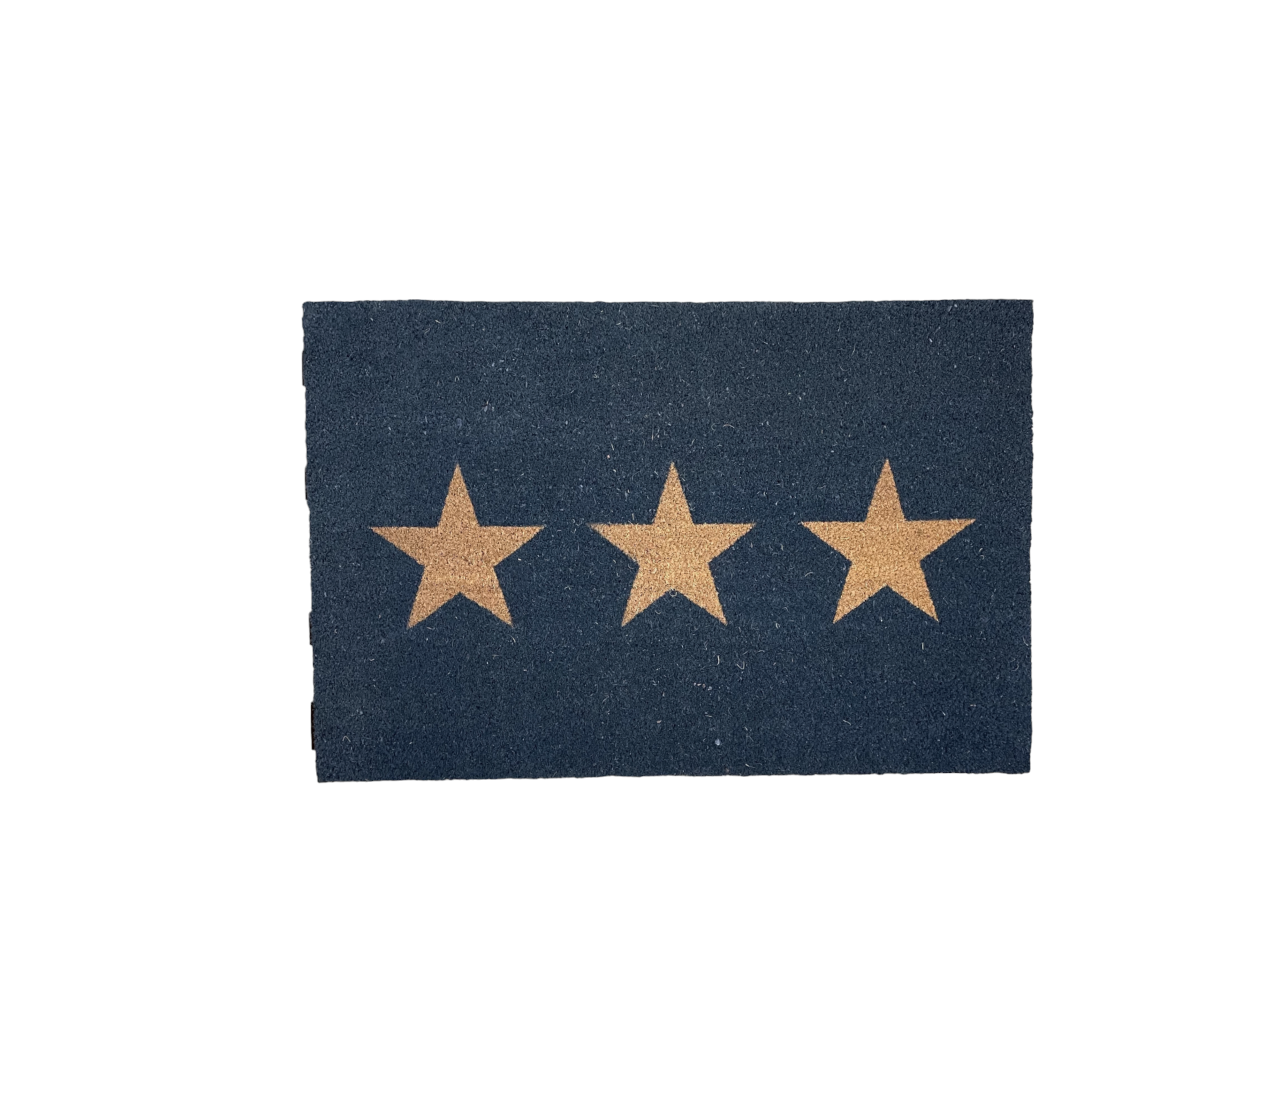 Small 3 Star Doormat in Charcoal